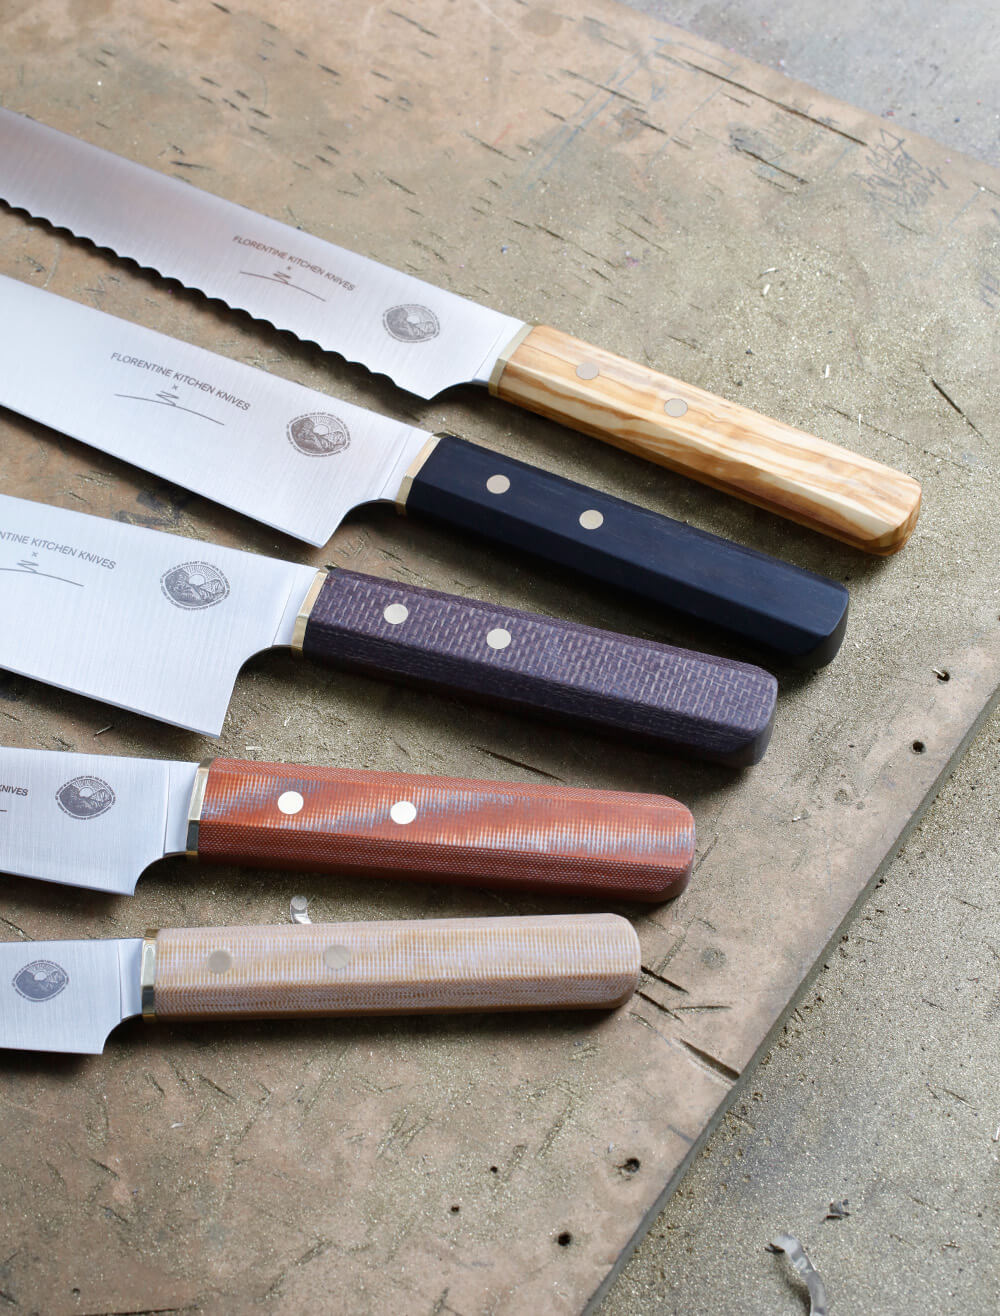 Nomad Series 8 Chef Knife